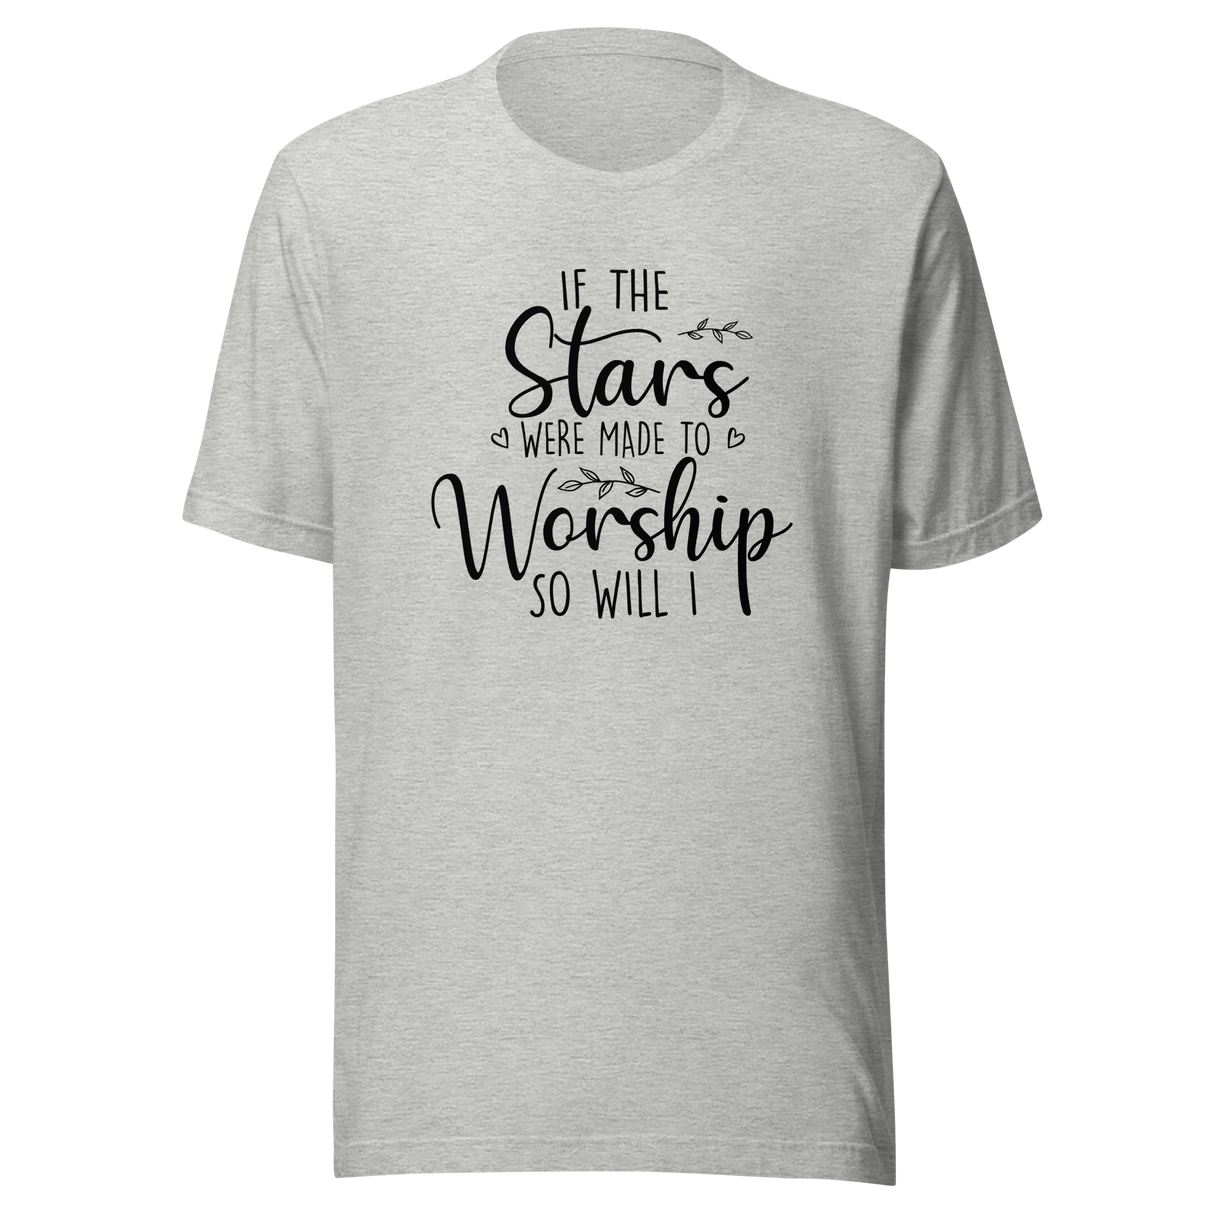 if-the-stars-were-made-to-worship-so-will-i-faith-tee-worship-t-shirt-faith-tee-stars-t-shirt-devotion-tee#color_athletic-heather